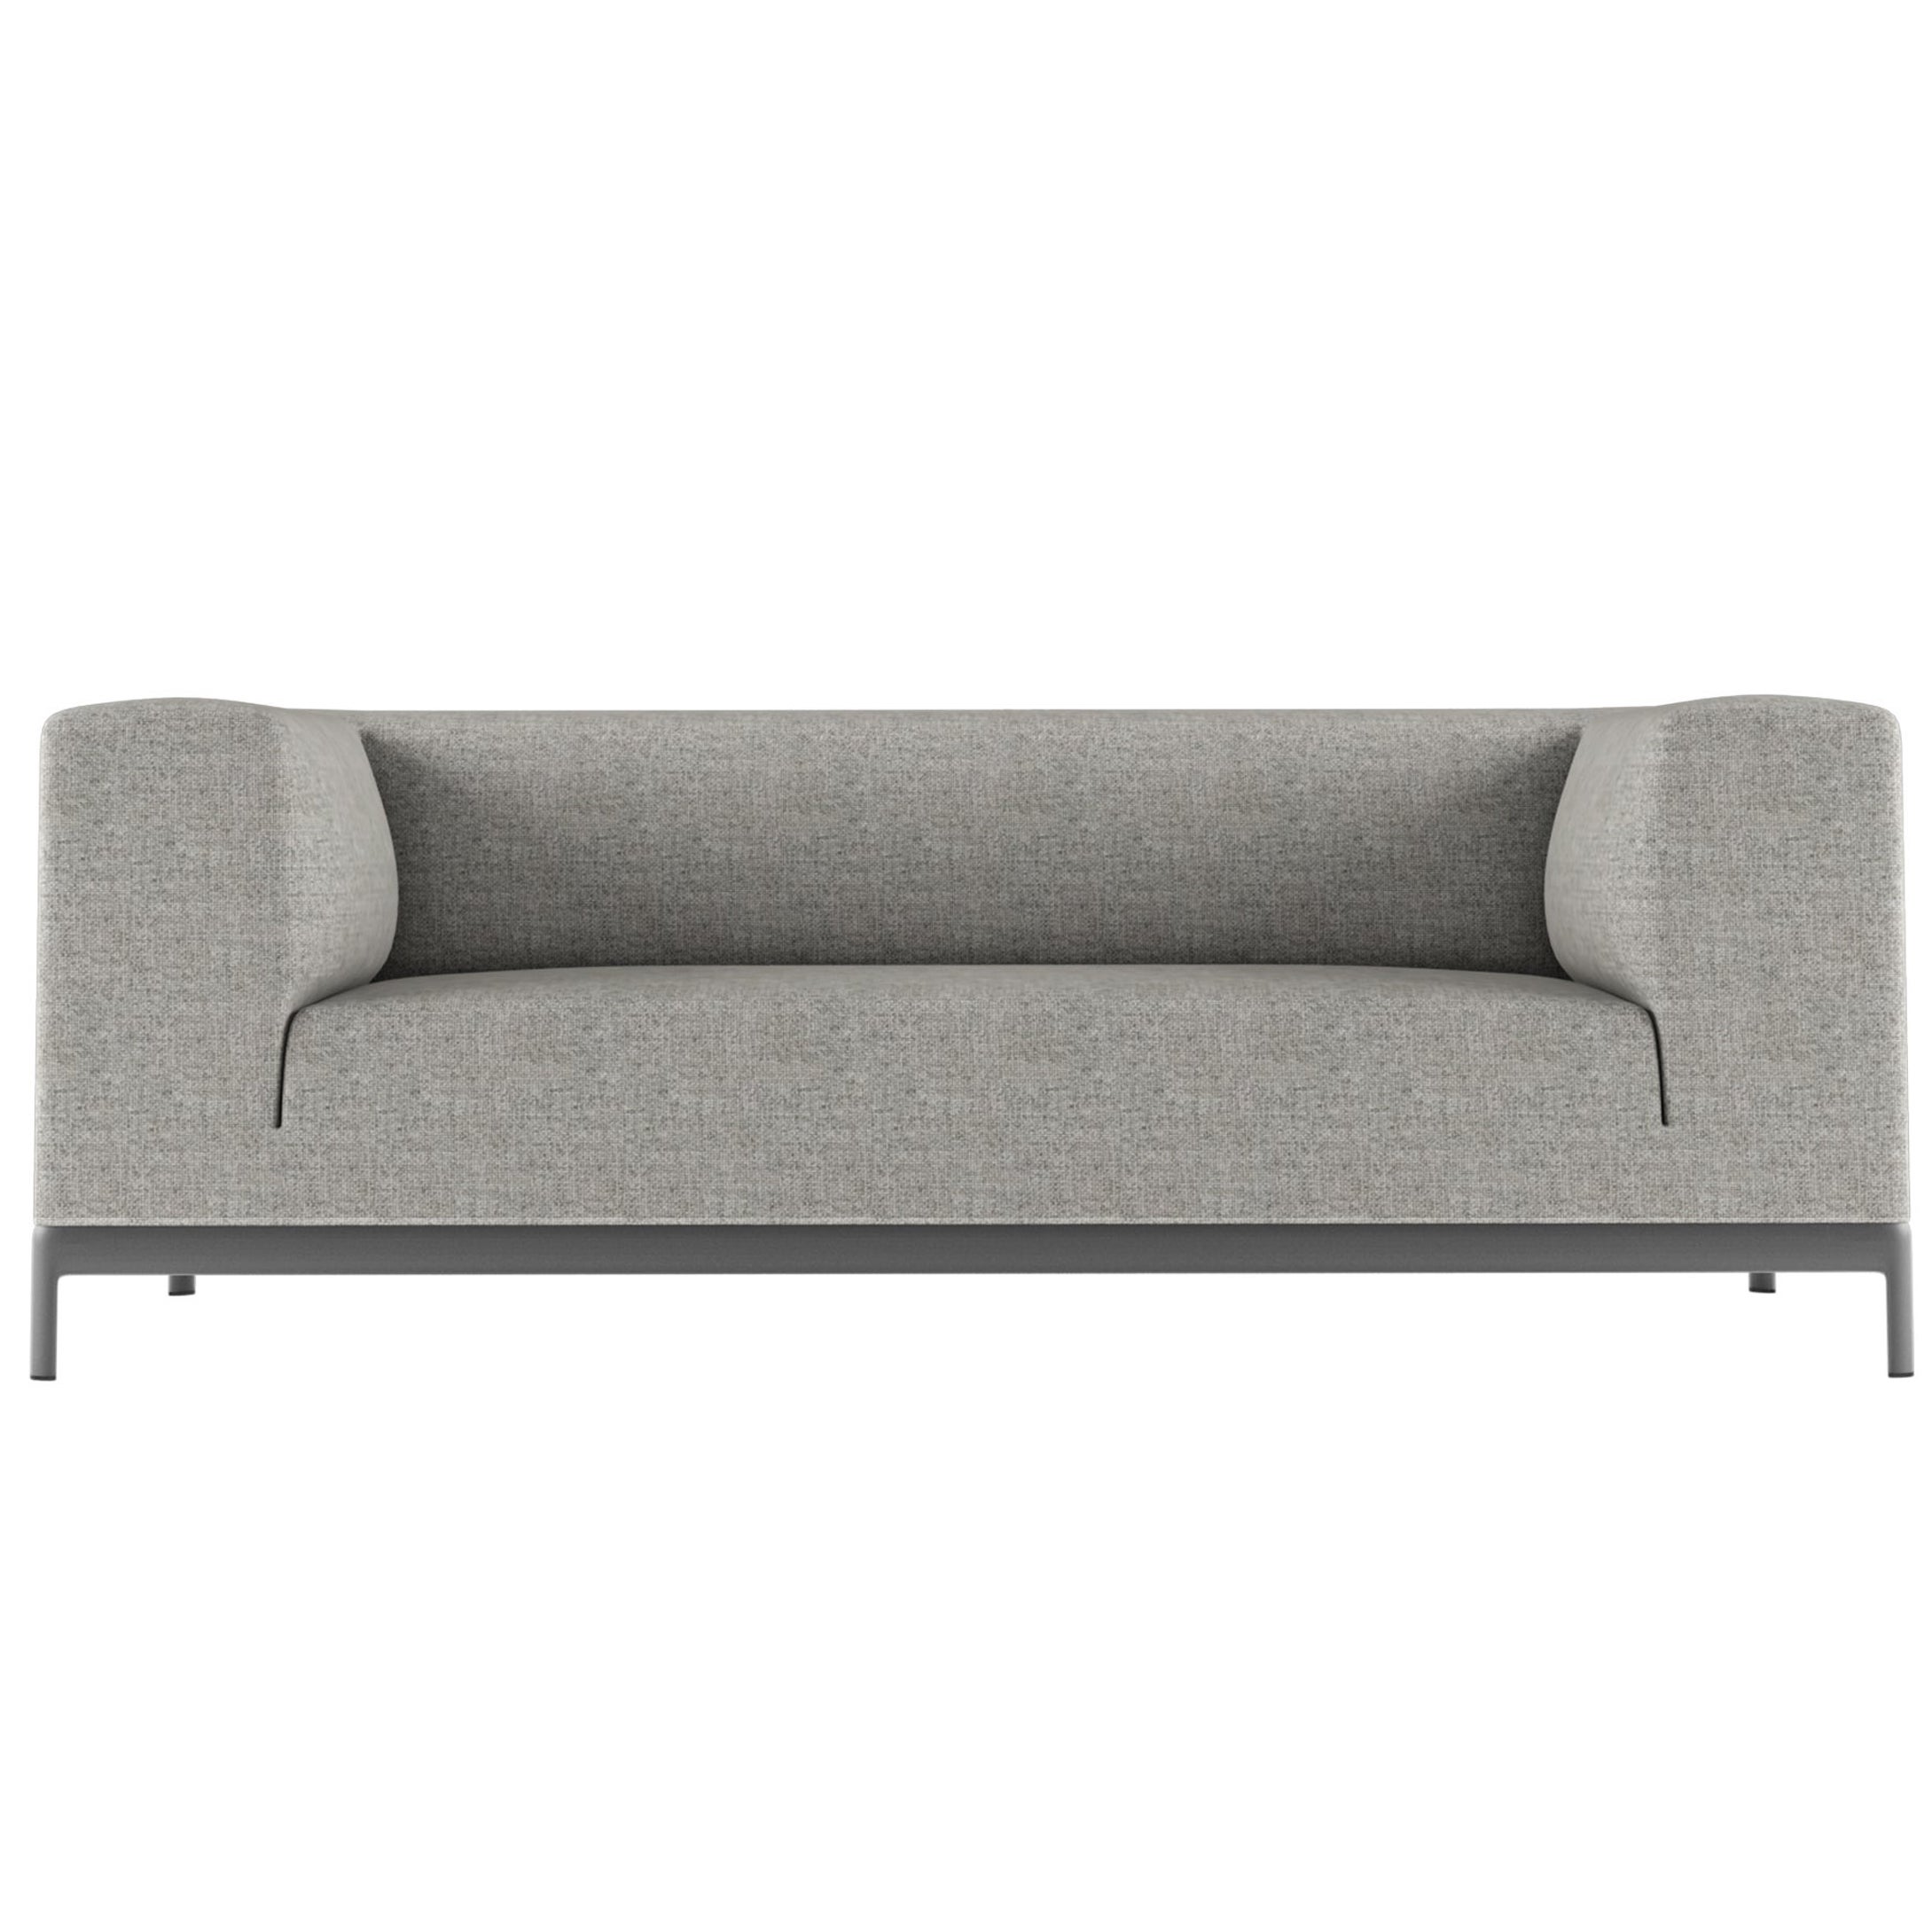 Alias P60 AluZen Outdoor Two Seater Soft Sofa in Upholstery with Aluminium Frame